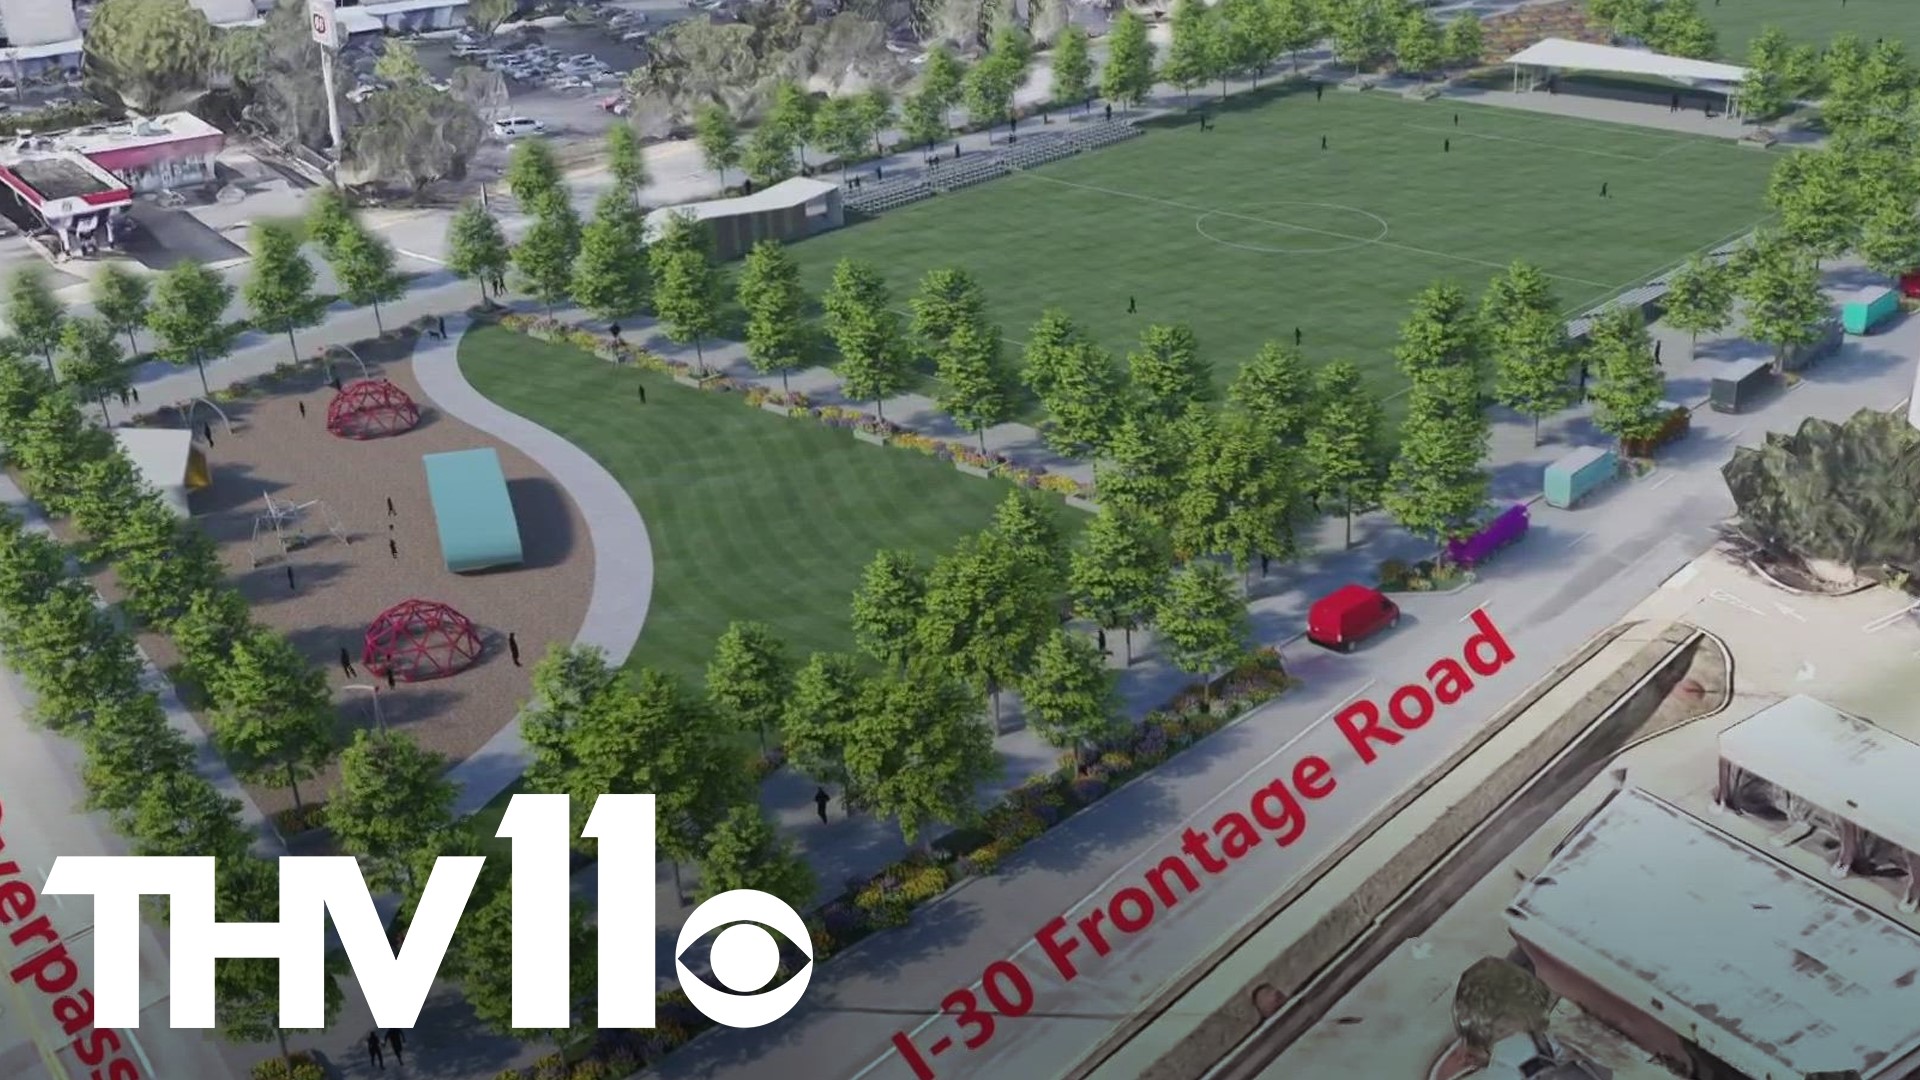 There are some big plans in the works for downtown Little Rock— On Monday, officials announced their plans to design a new deck park over Interstate 30.